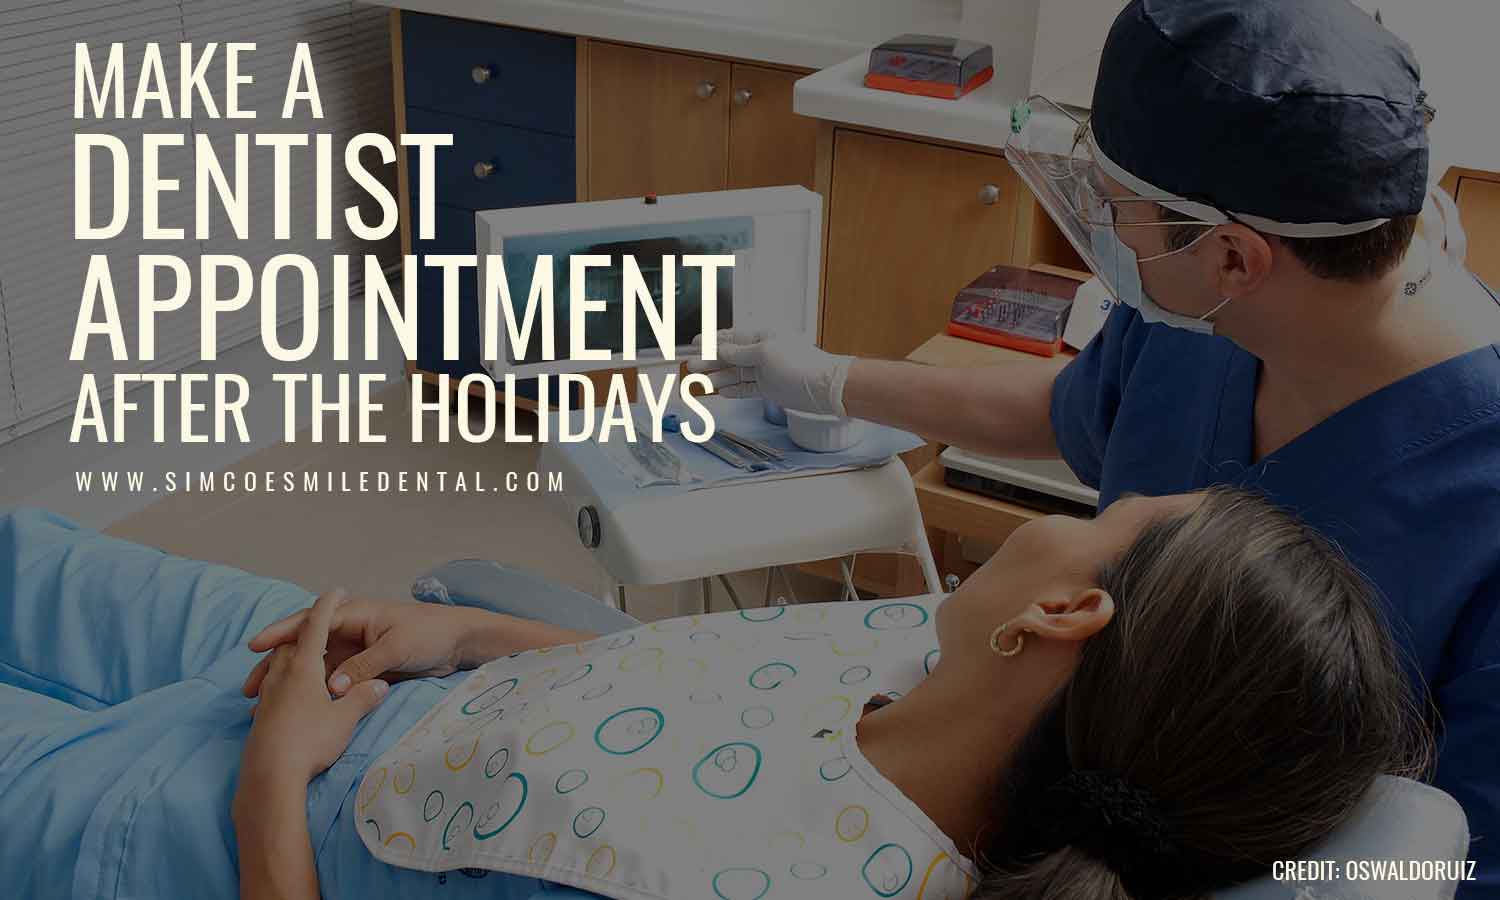 Make a dentist appointment after the holidays